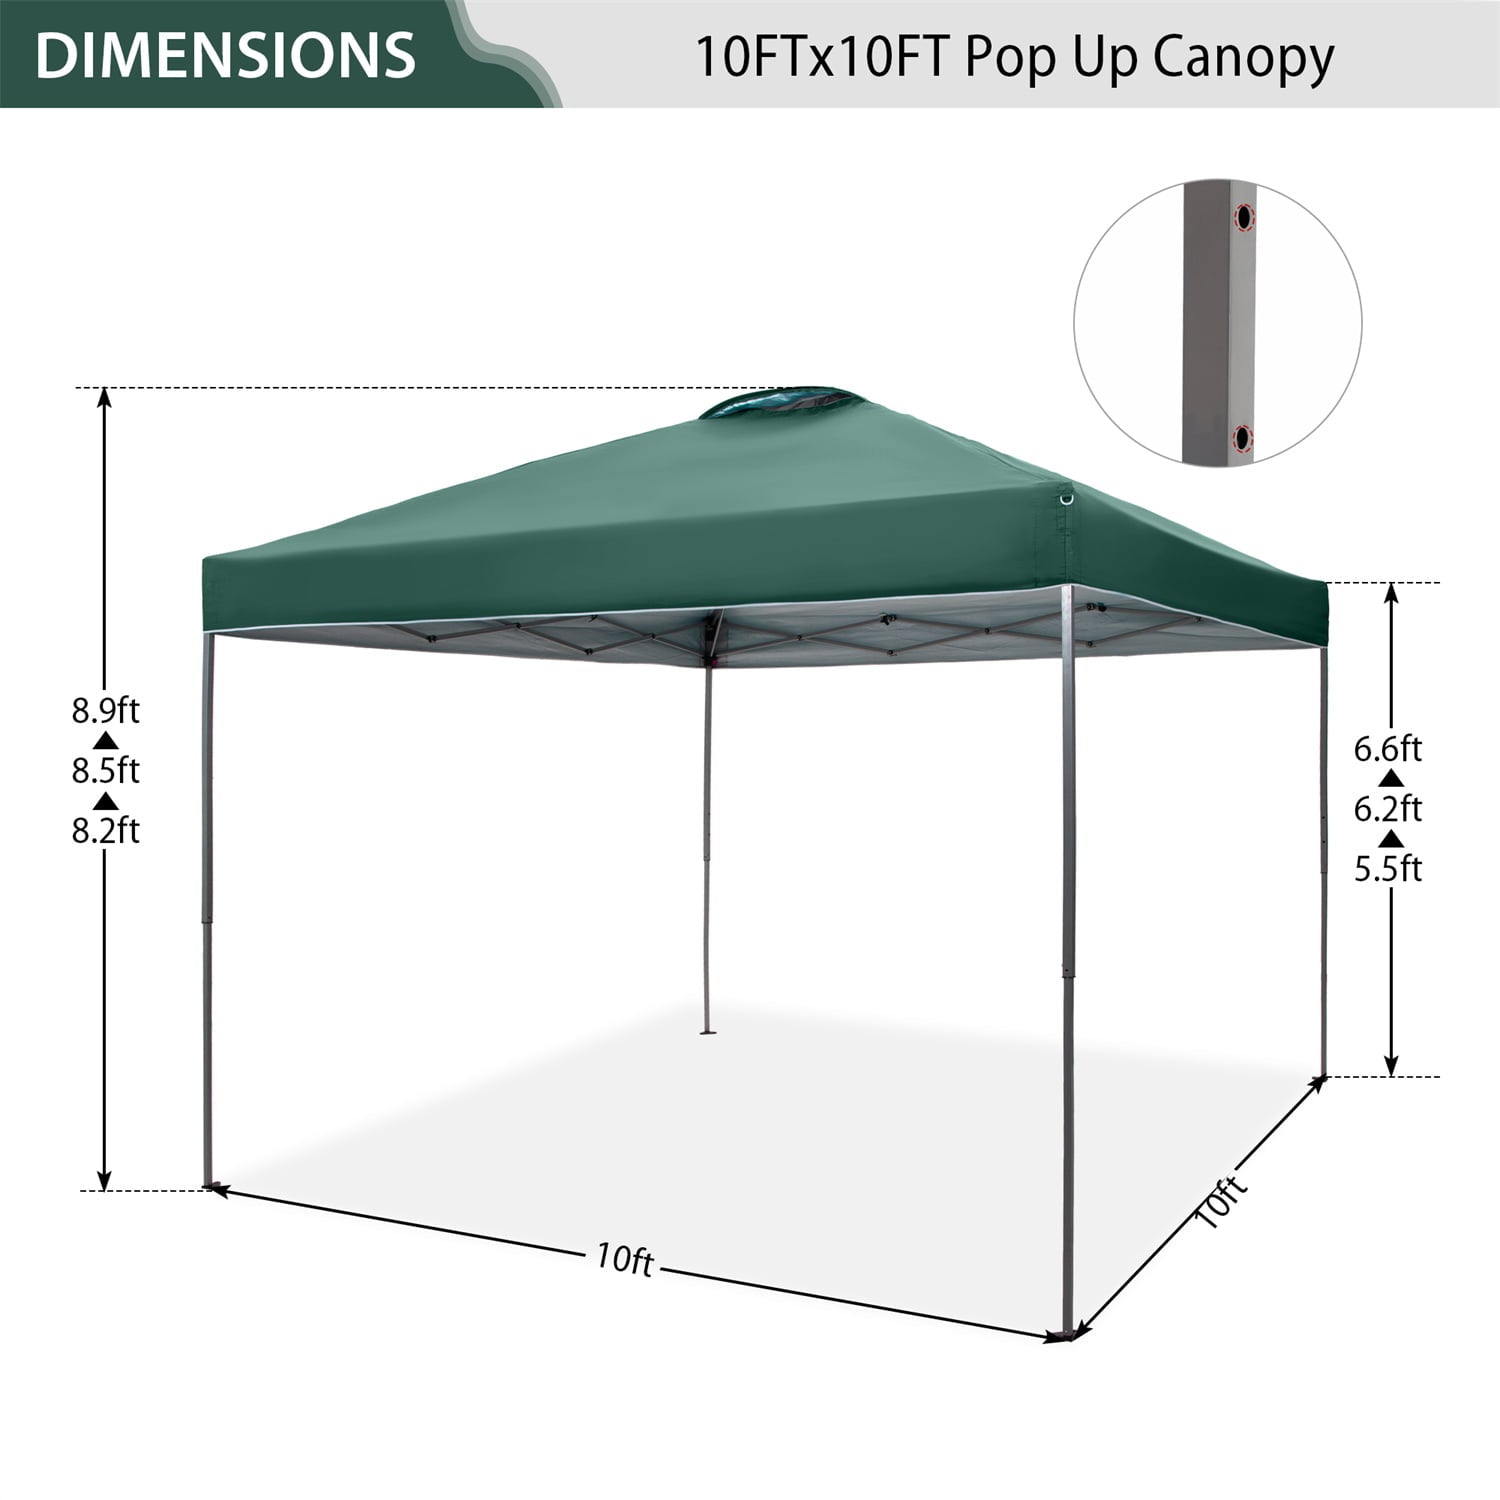 MF Studio 10x10ft Pop-up Canopy Tent Straight Legs Instant Canopy for Outside with Wheeled Bag - Green